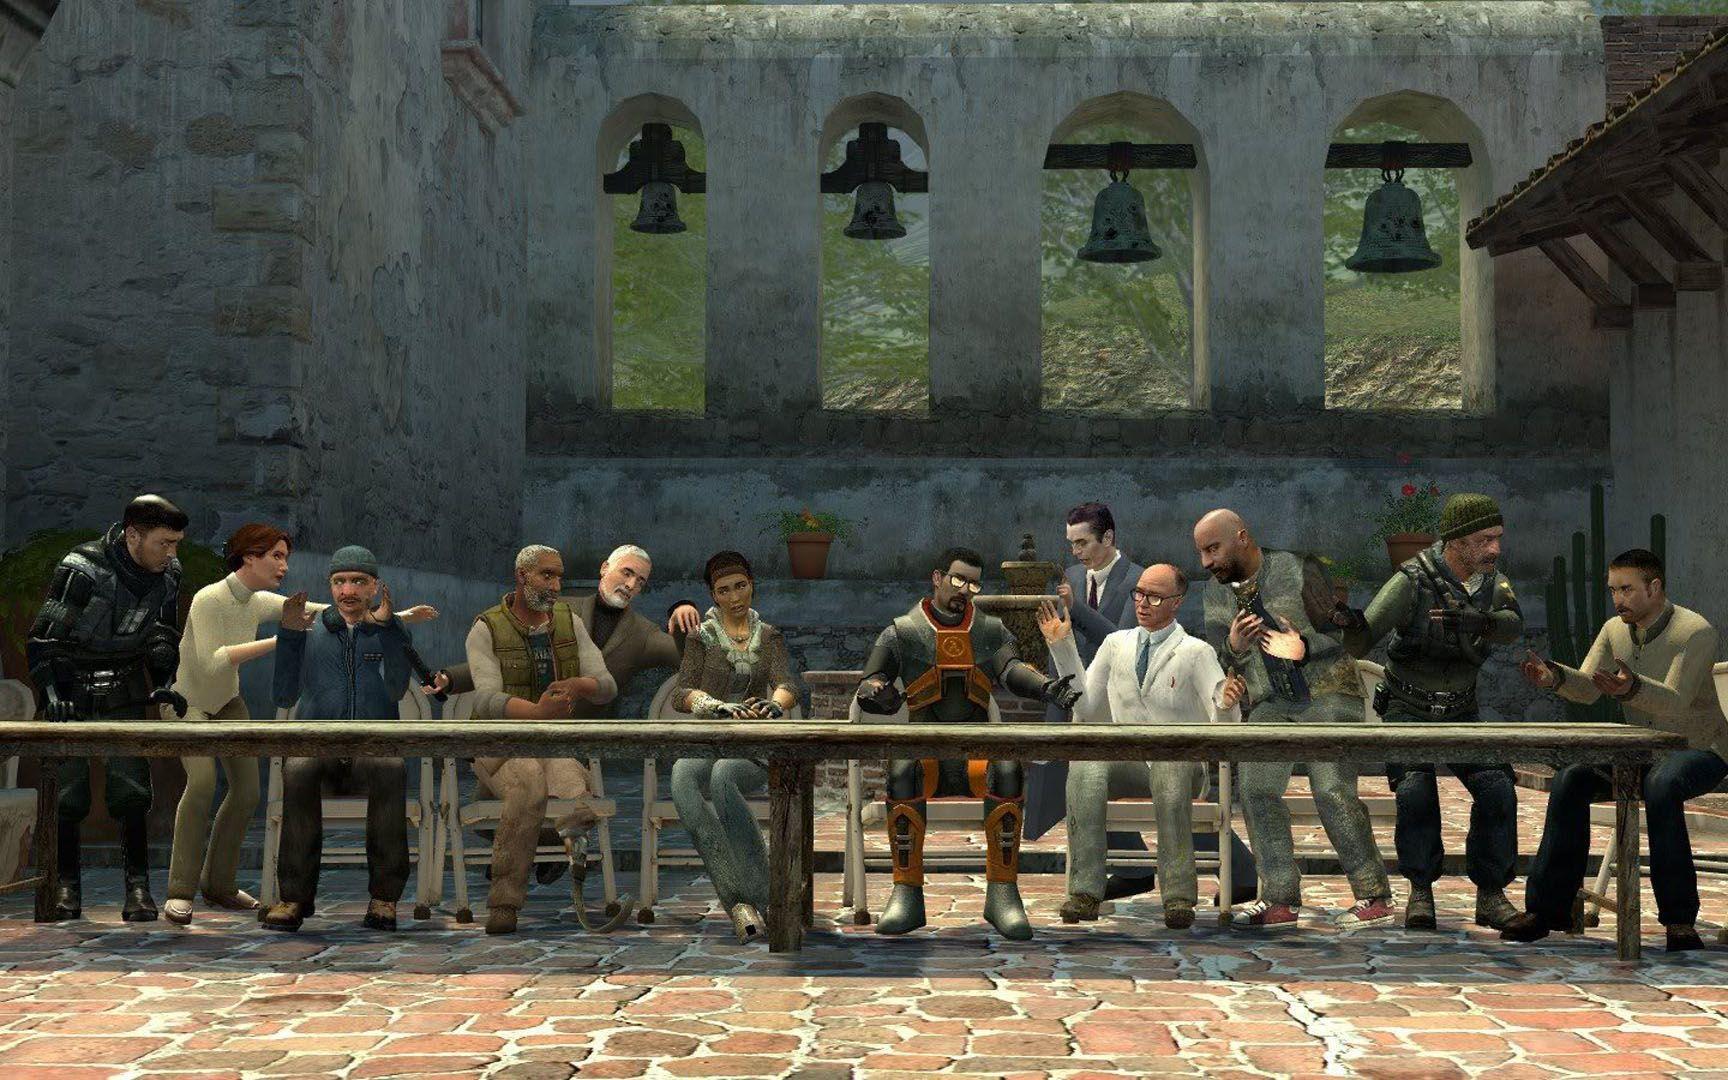 The Last Supper Games Wallpaper Image featuring Half Life 2